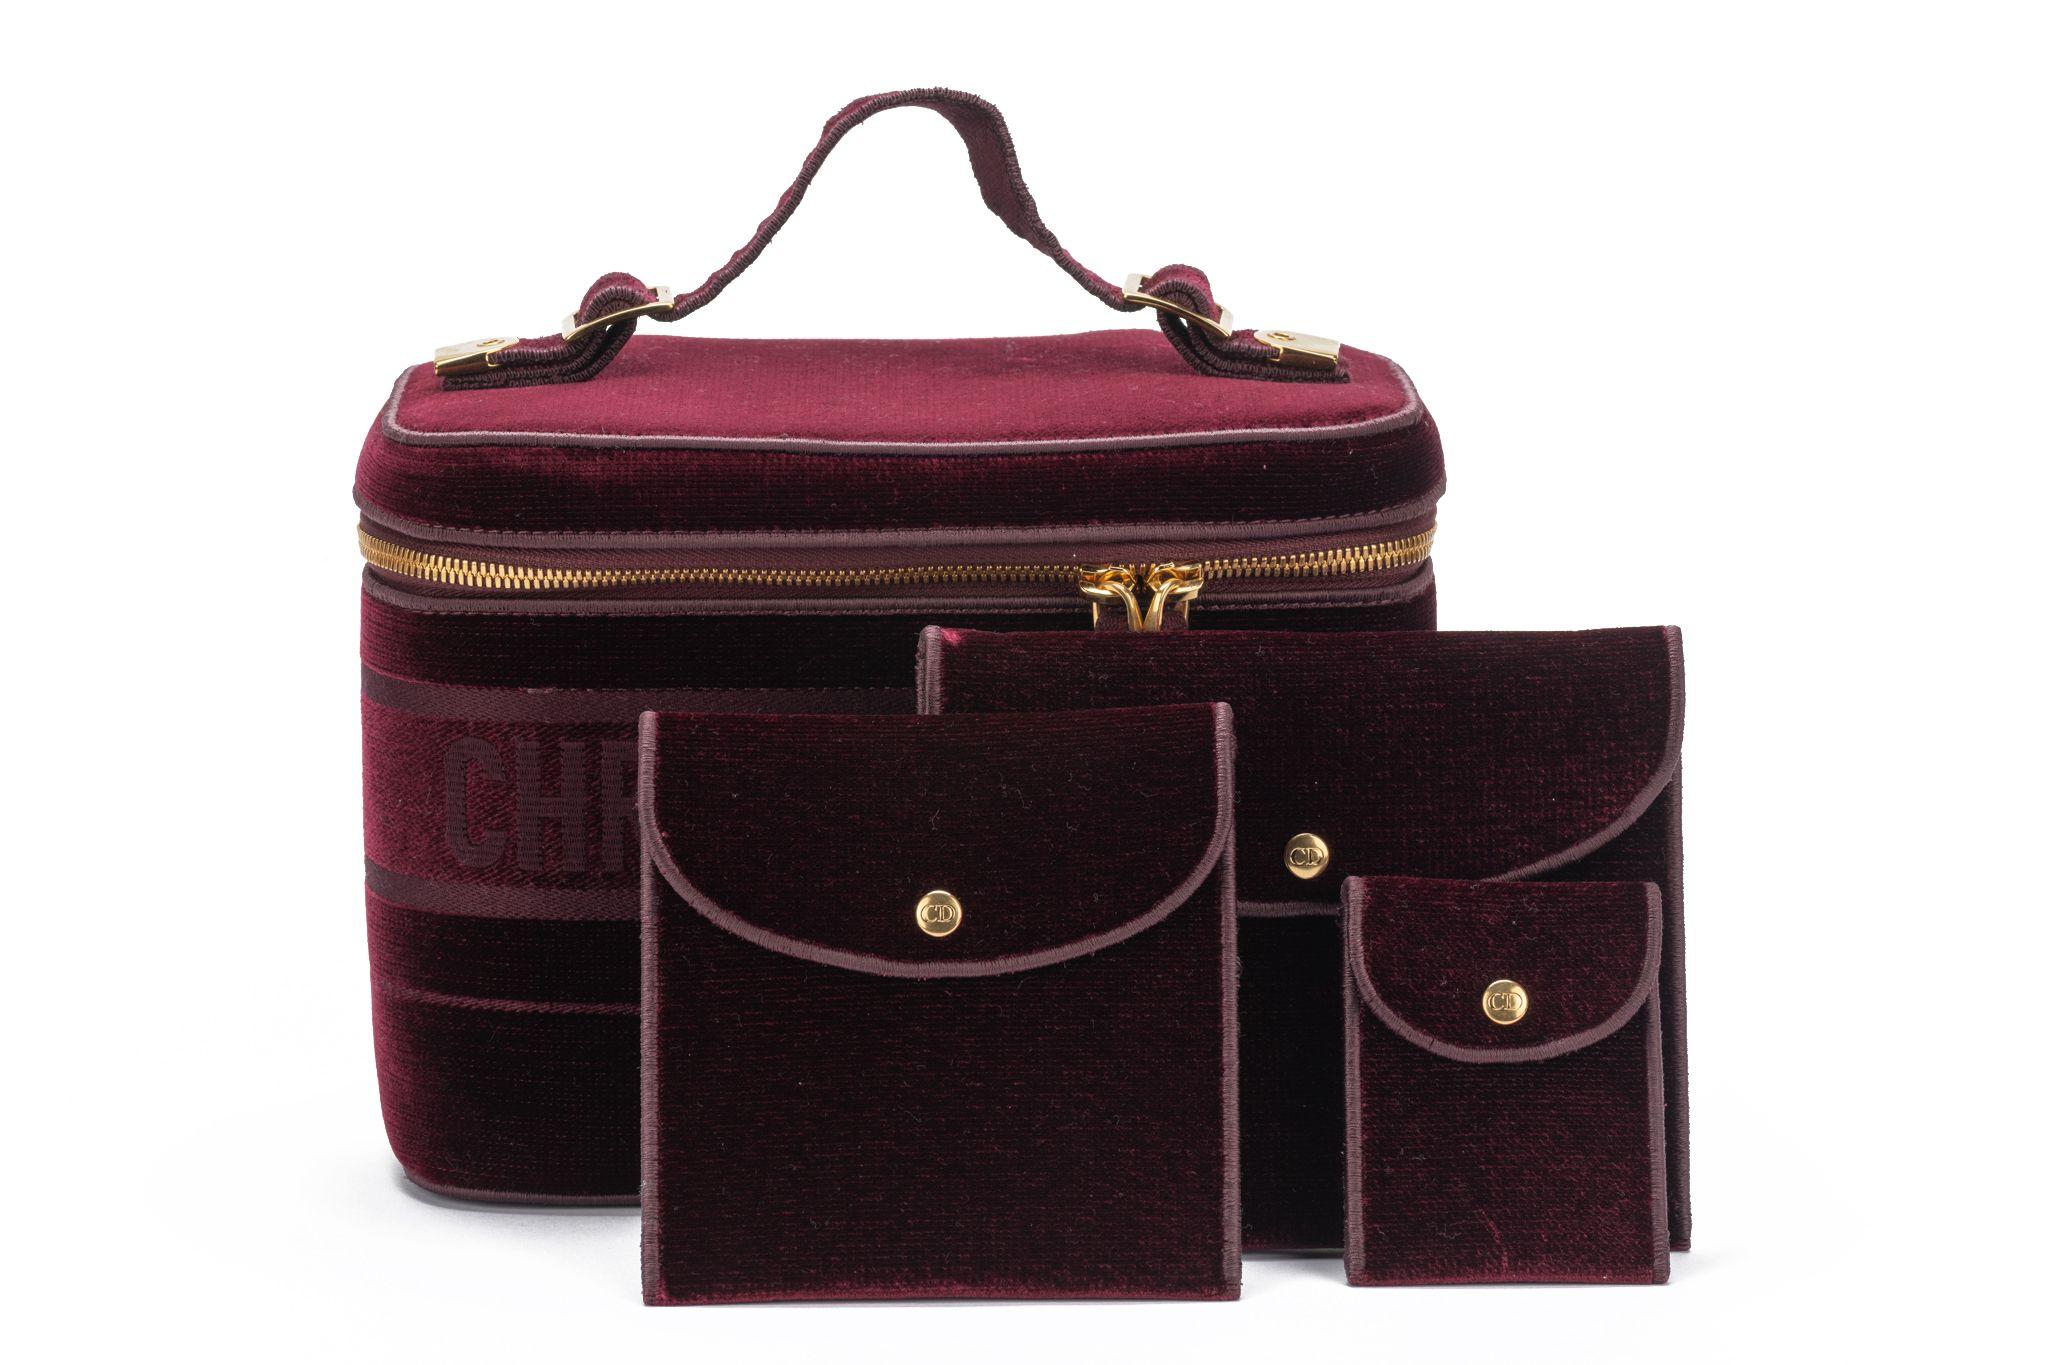 Dior New Travel Velvet Bag Burgundy In New Condition For Sale In West Hollywood, CA